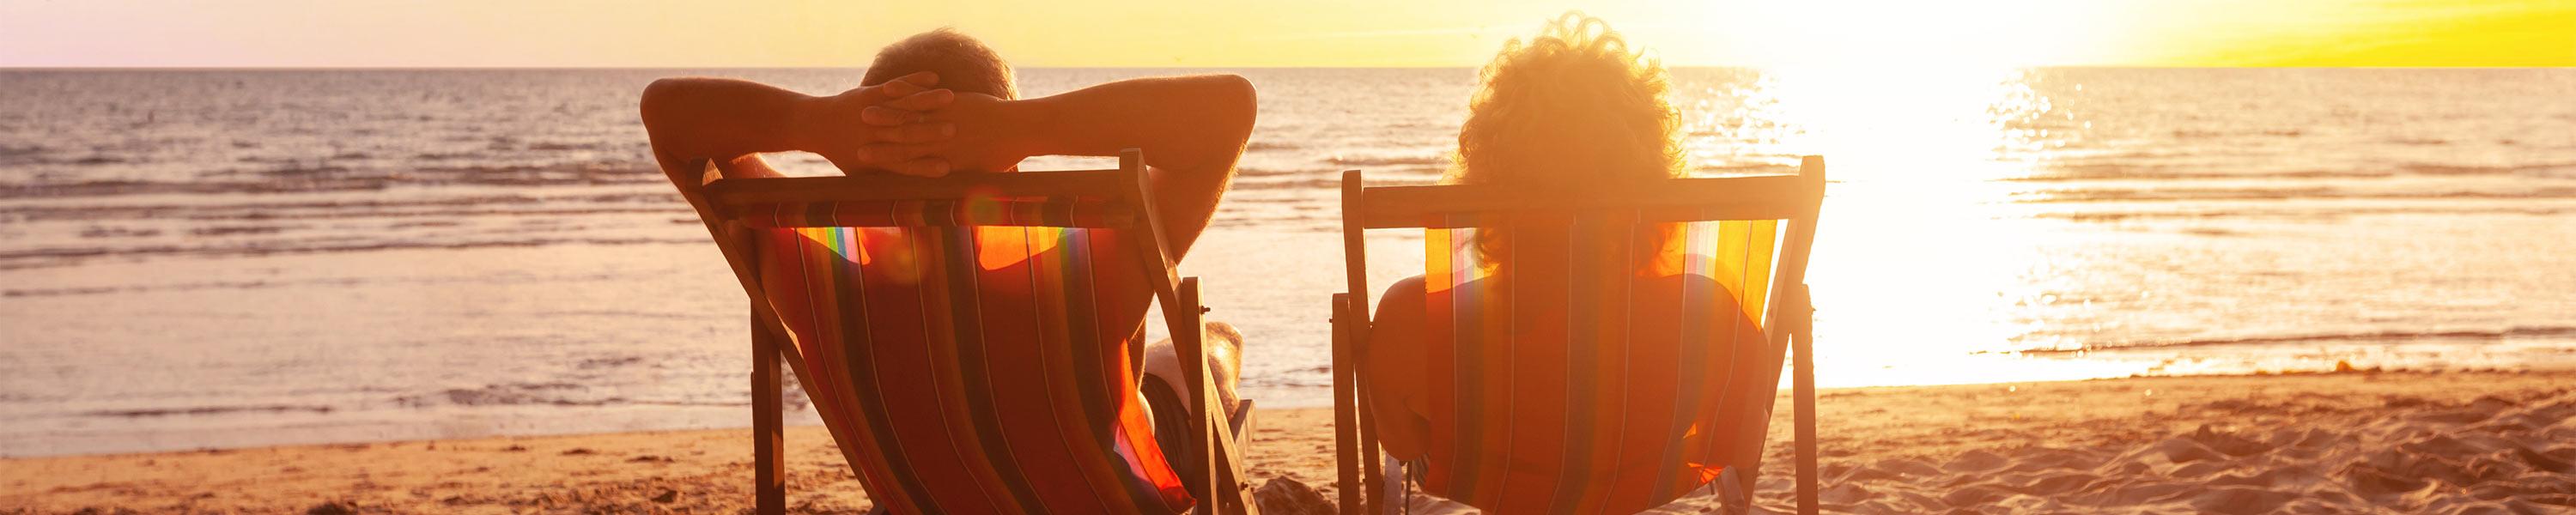 Couple relaxing on the beach at sunset